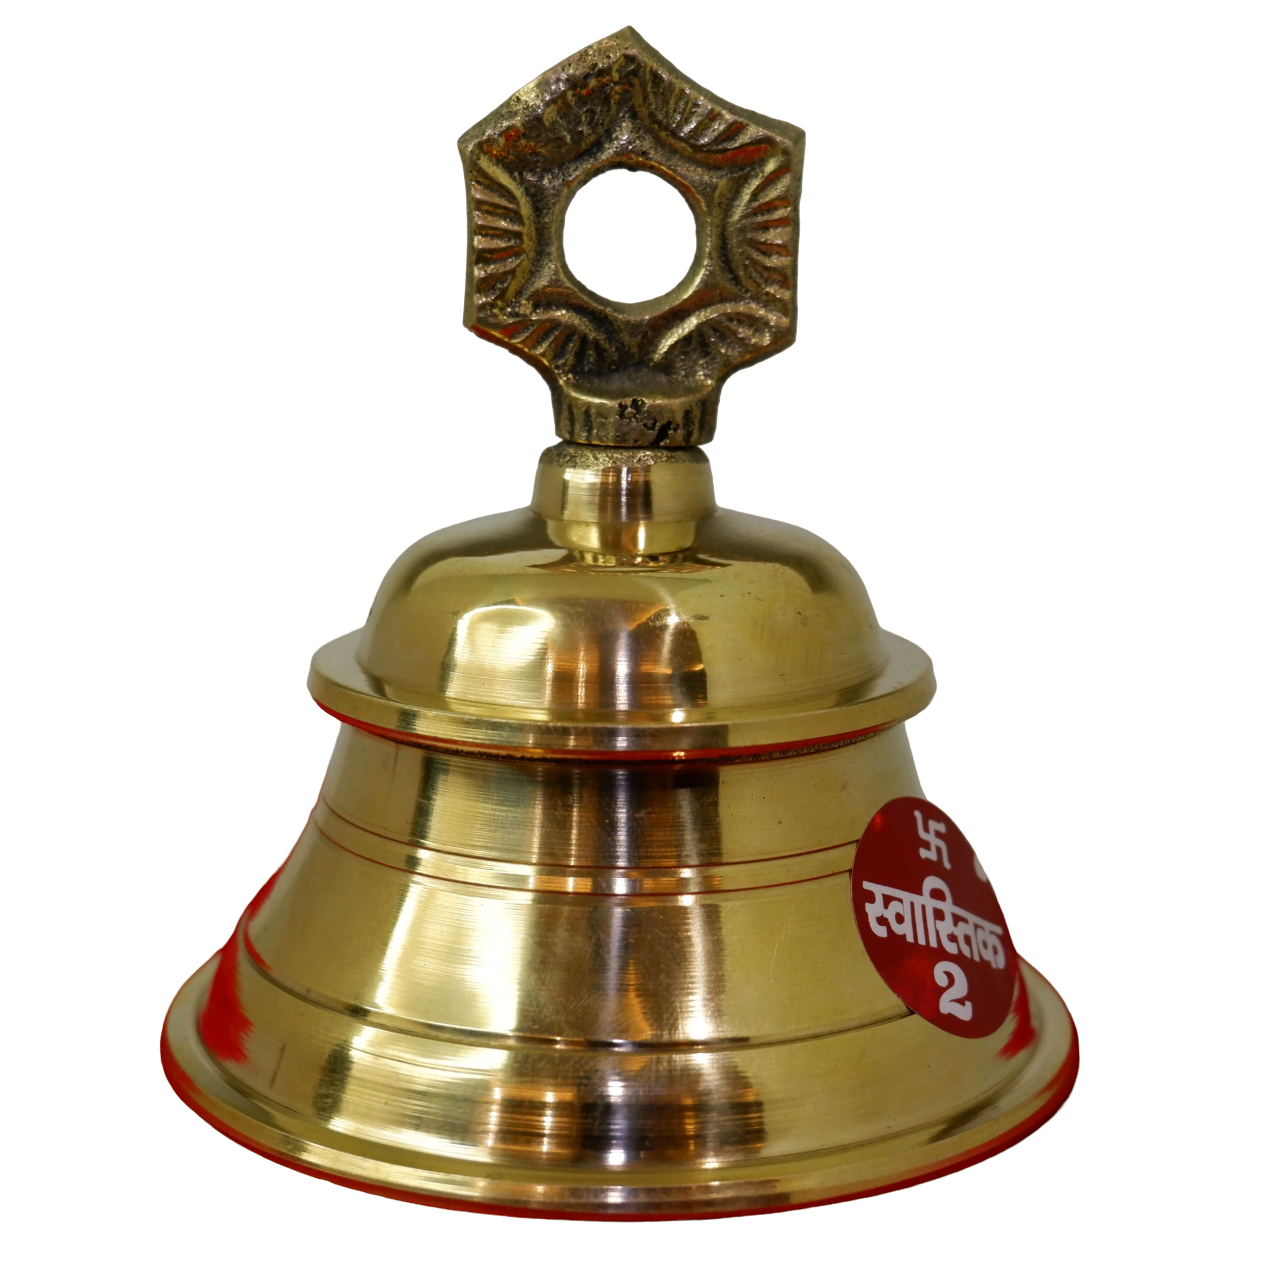 2 small brass hanging bell 